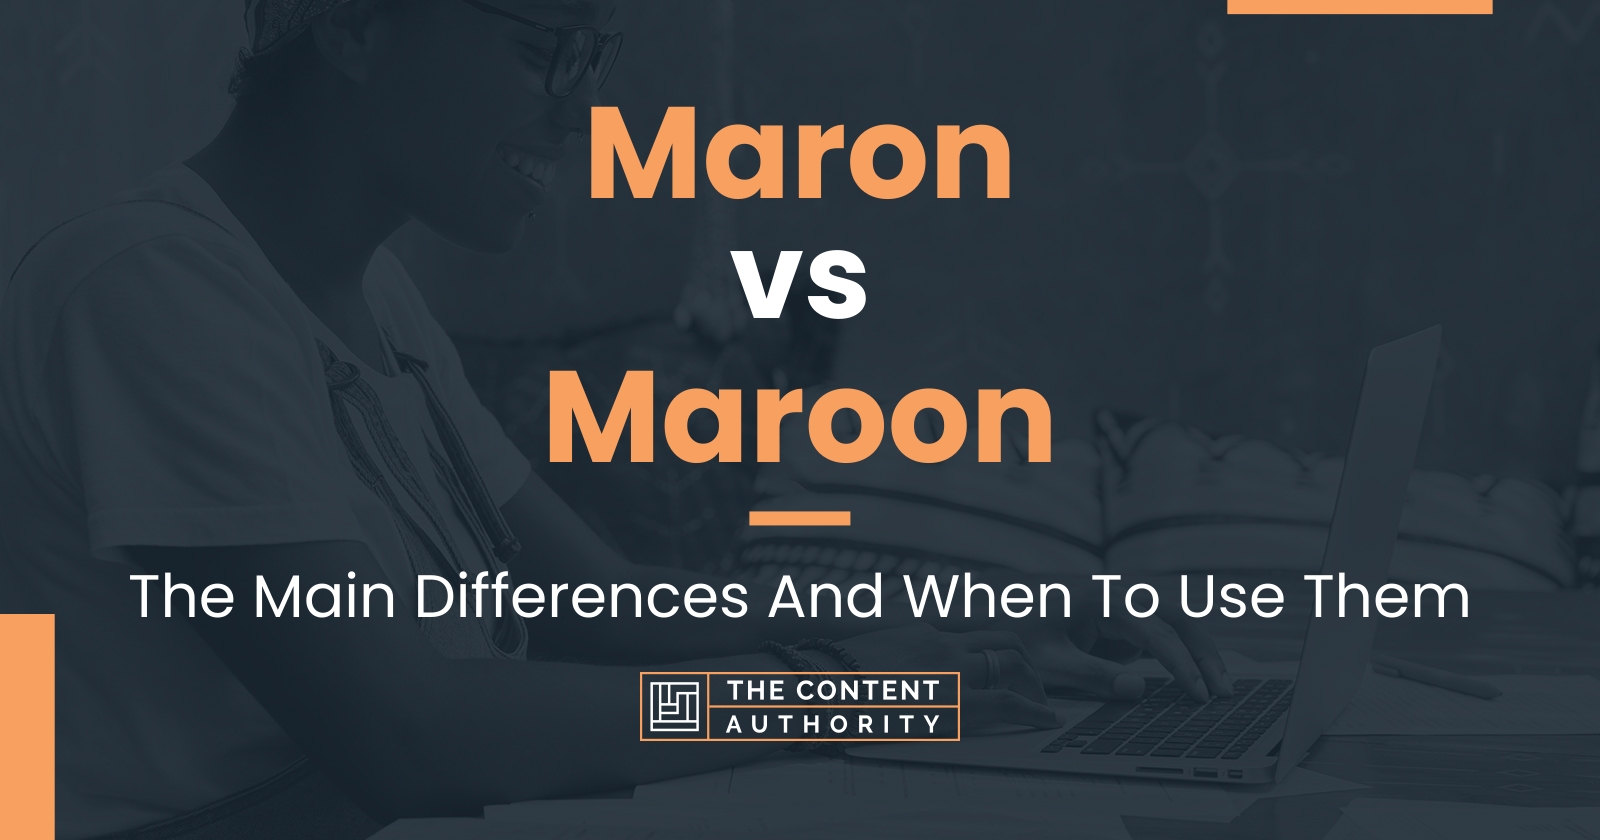 Maron vs Maroon: The Main Differences And When To Use Them